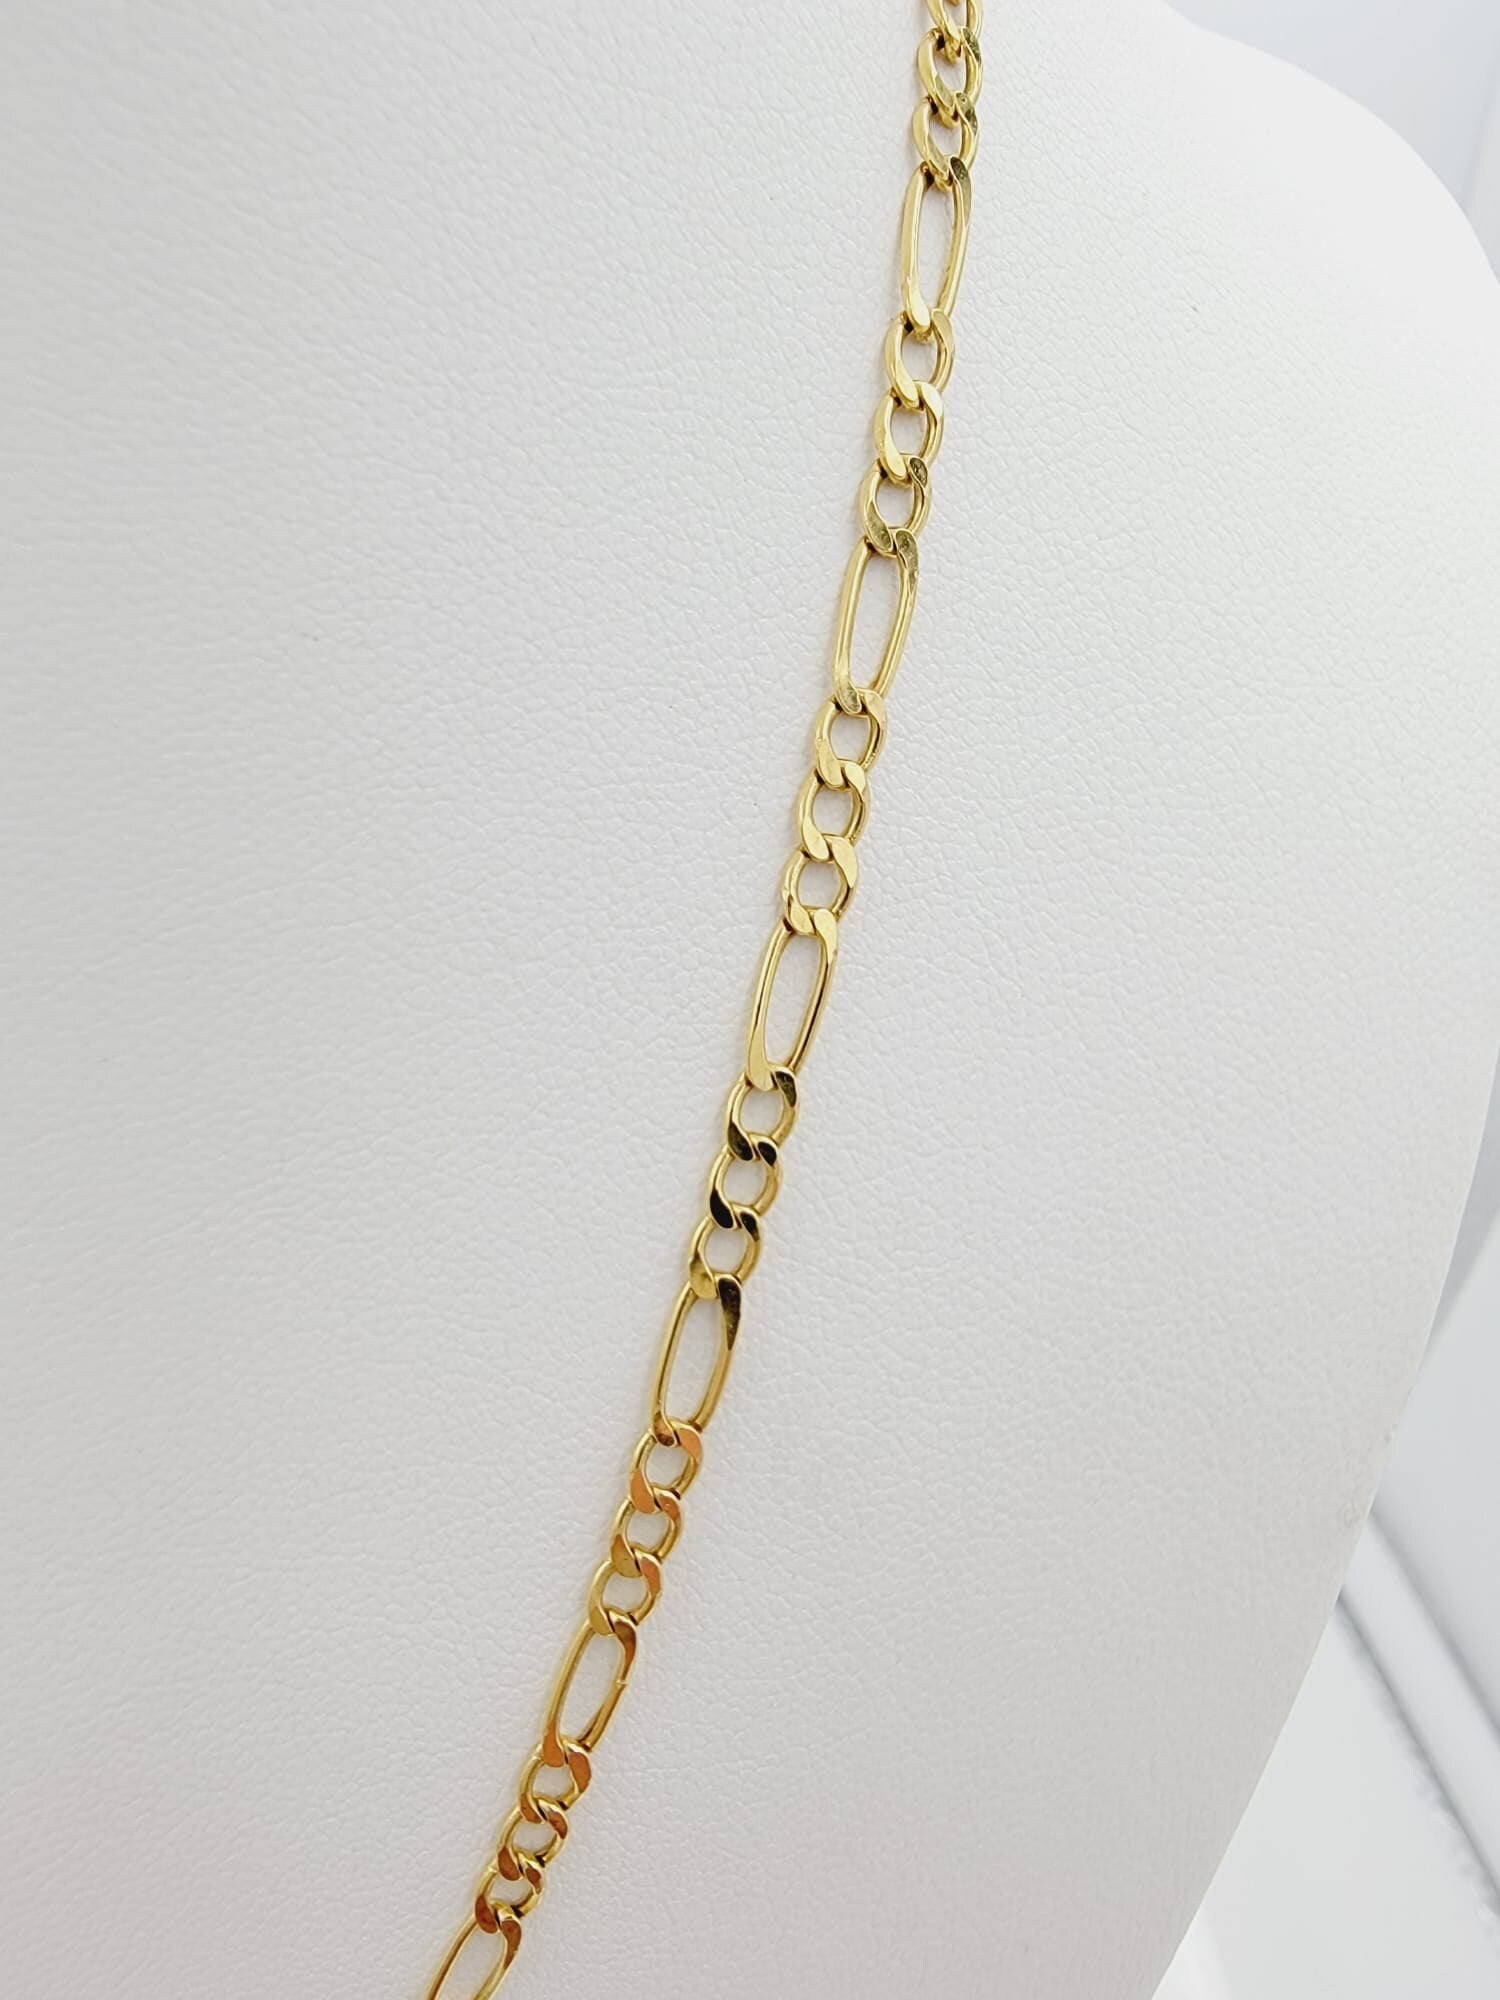 14k Solid Yellow Gold Figaro Chain, 20 Inch, 3.4mm, 5.0 Grams